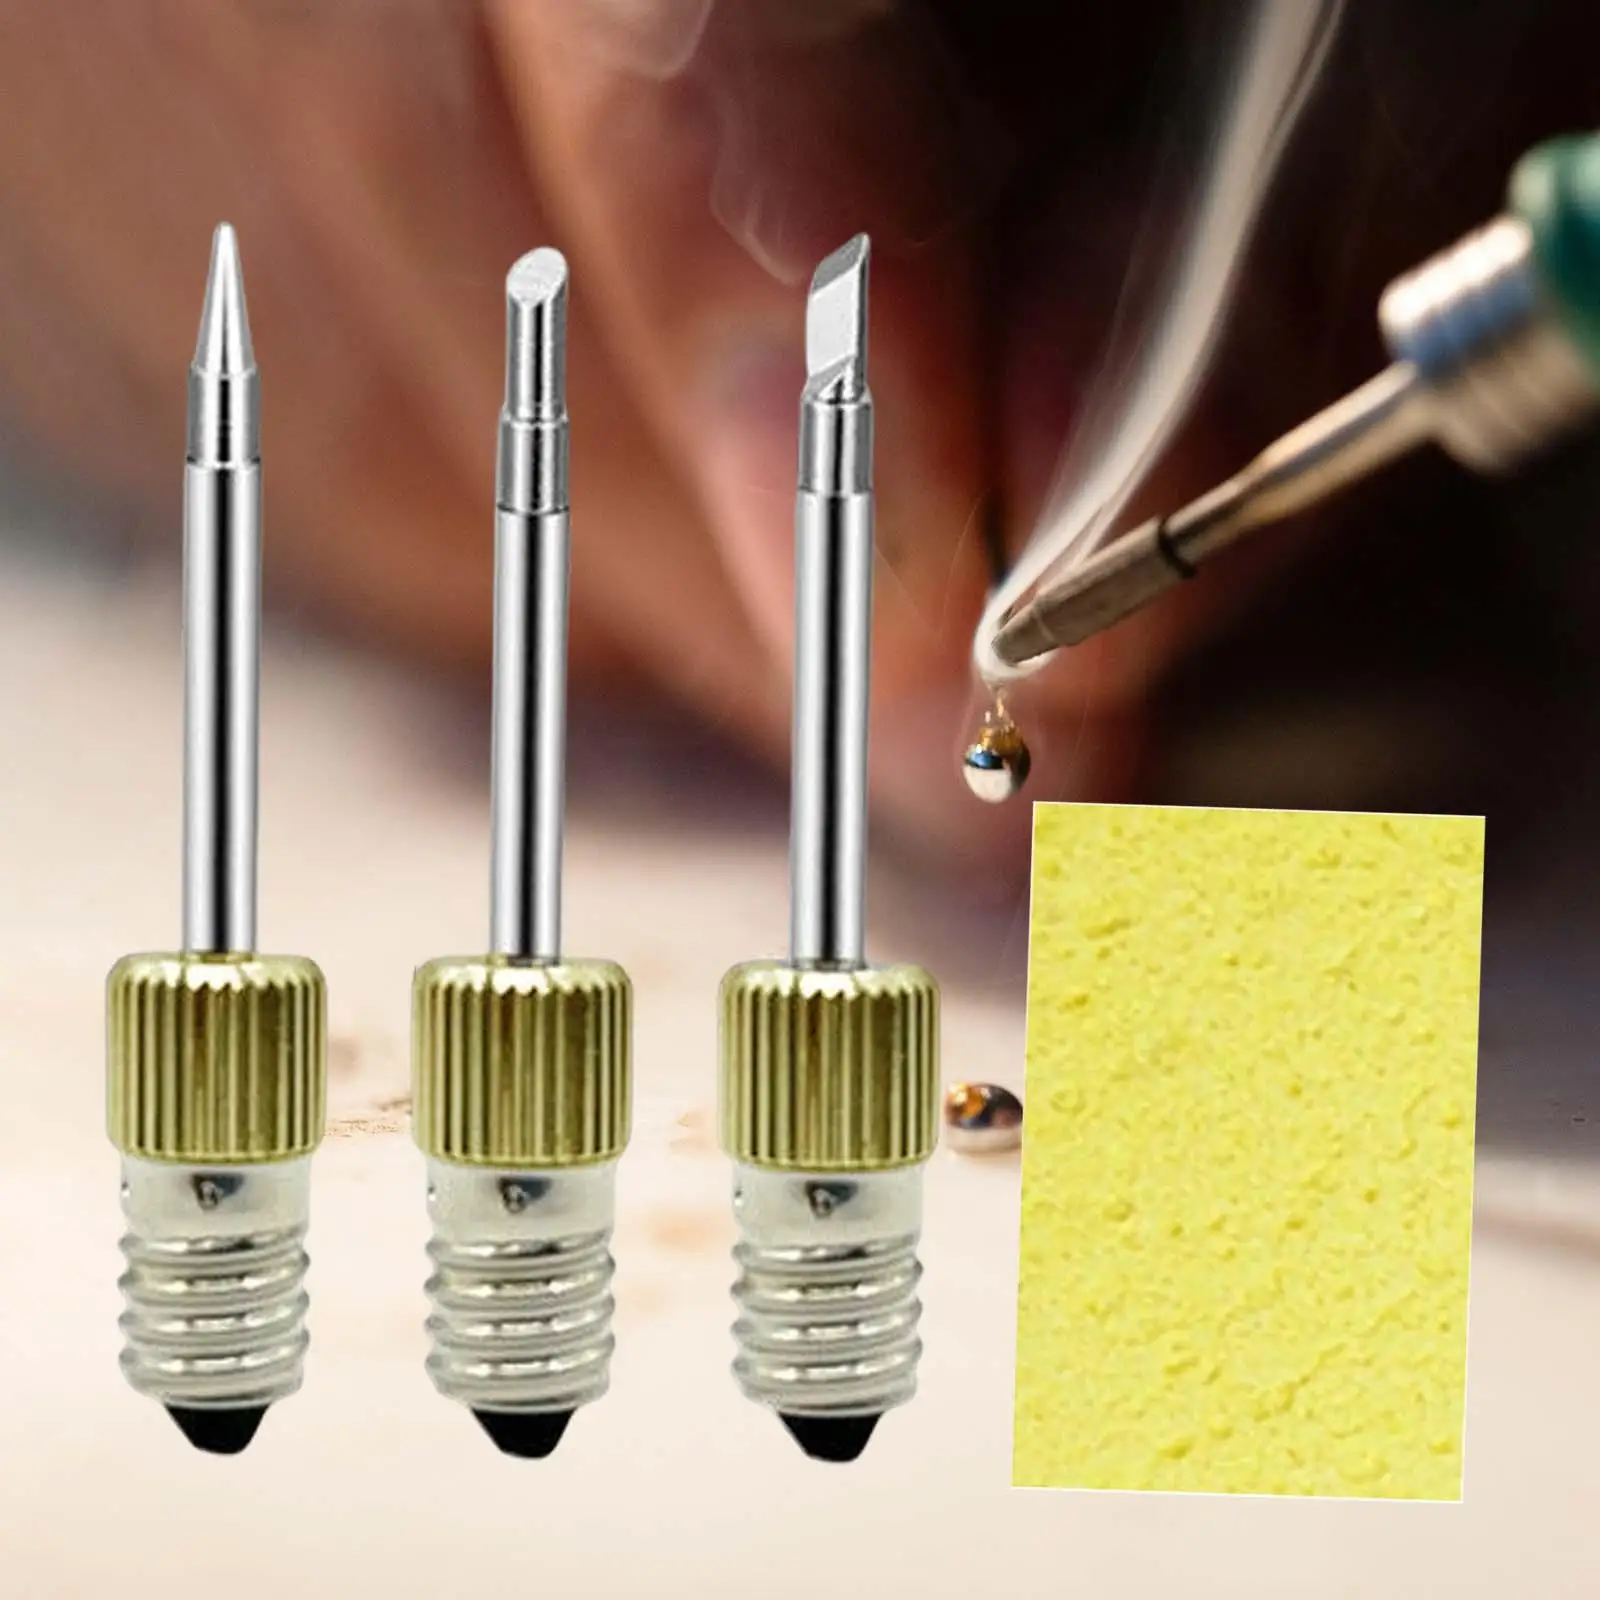 3x Soldering Iron Tips Durable Cordless Threaded Soldering Needle Tips Tools